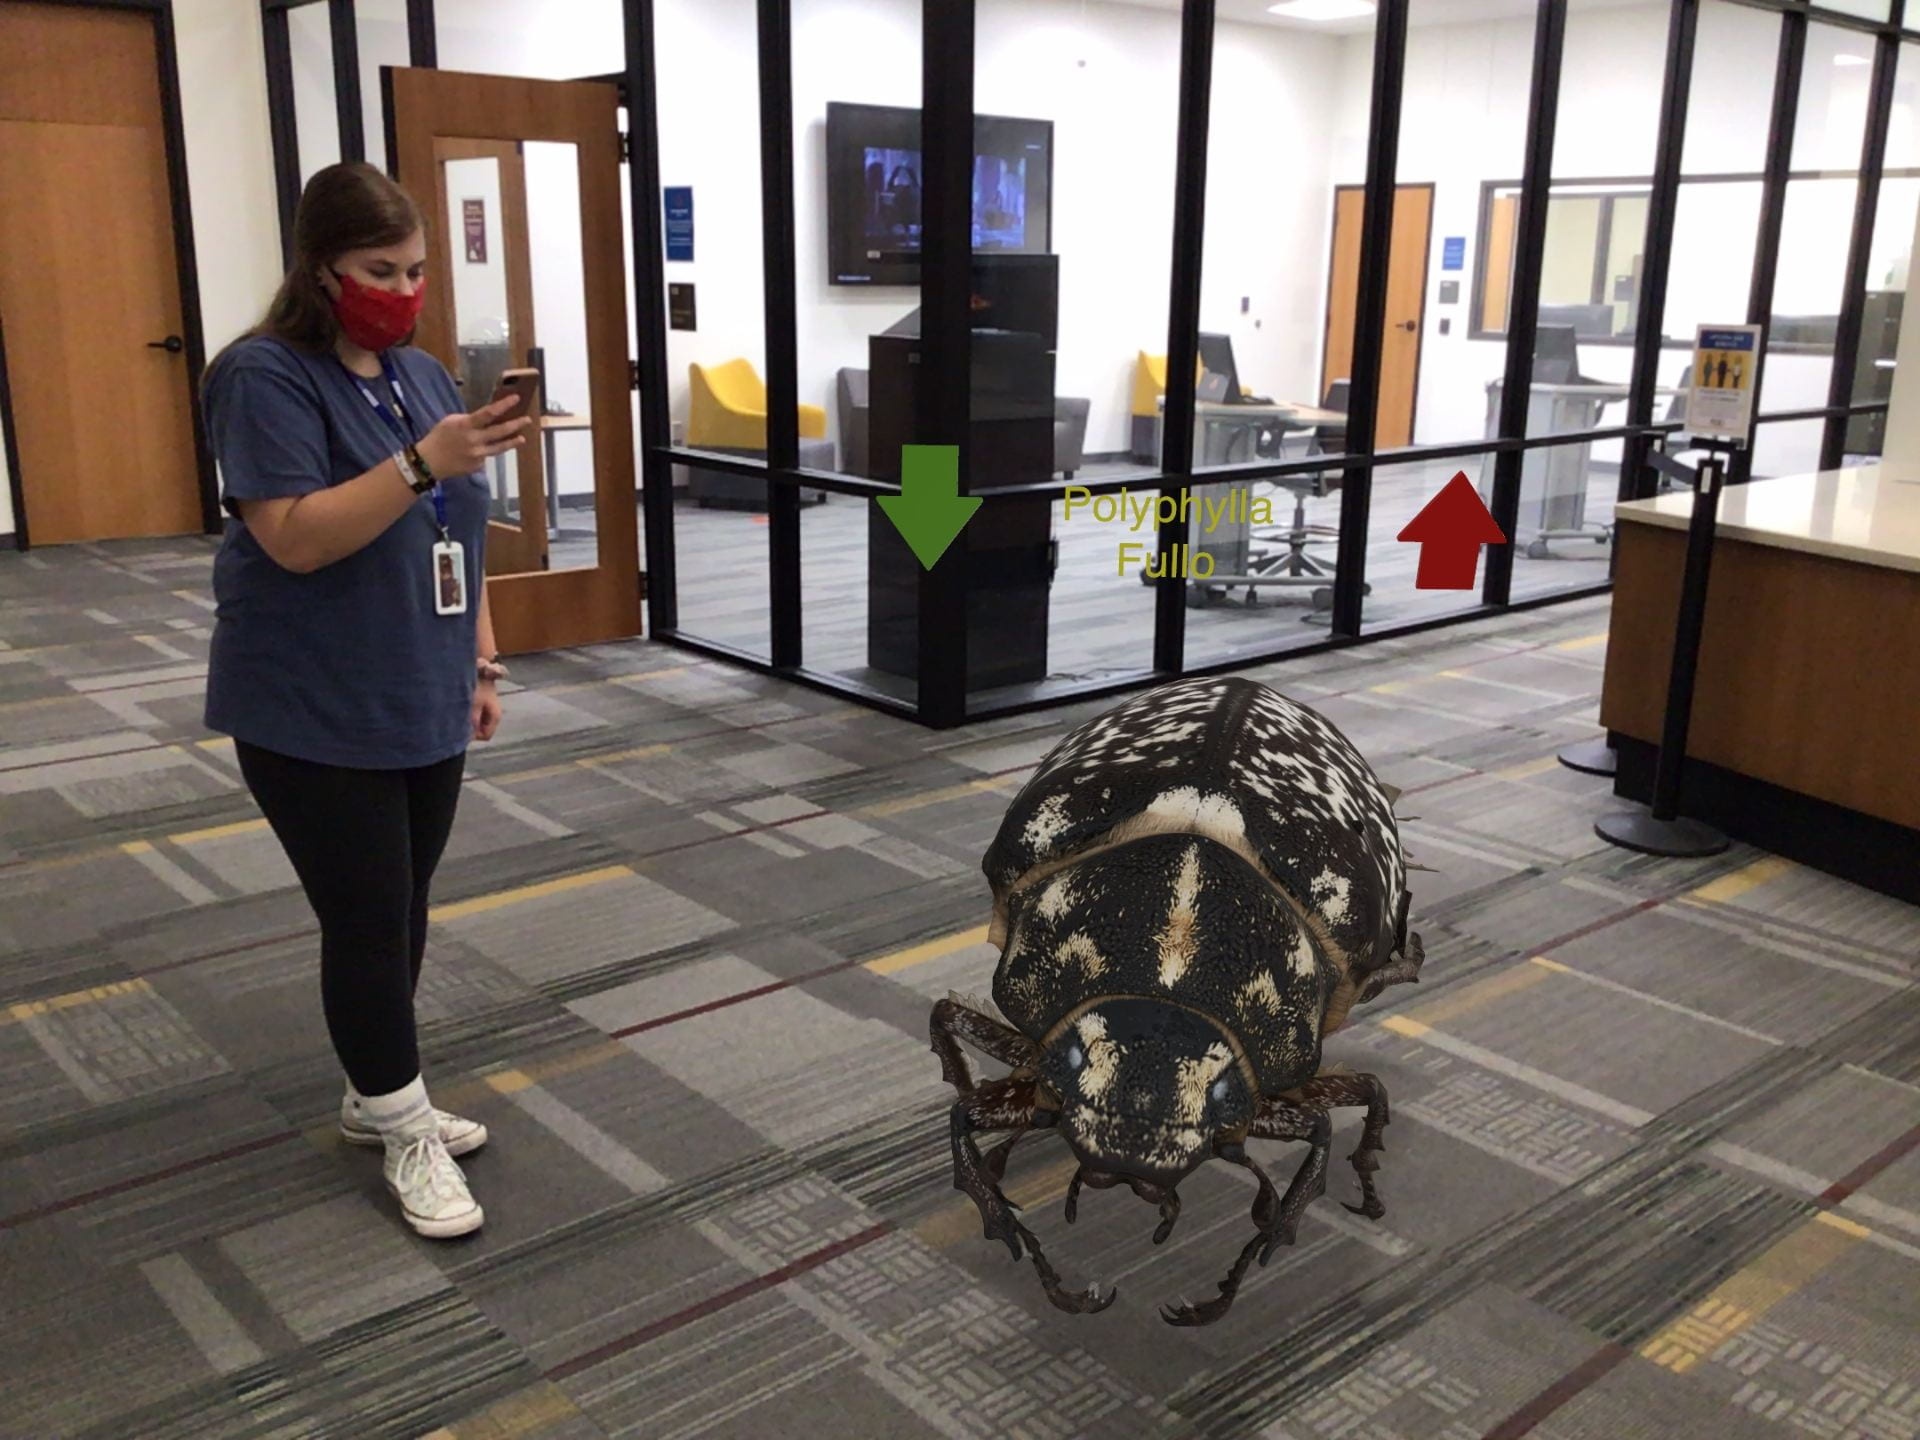 Giant spider added through augmented reality